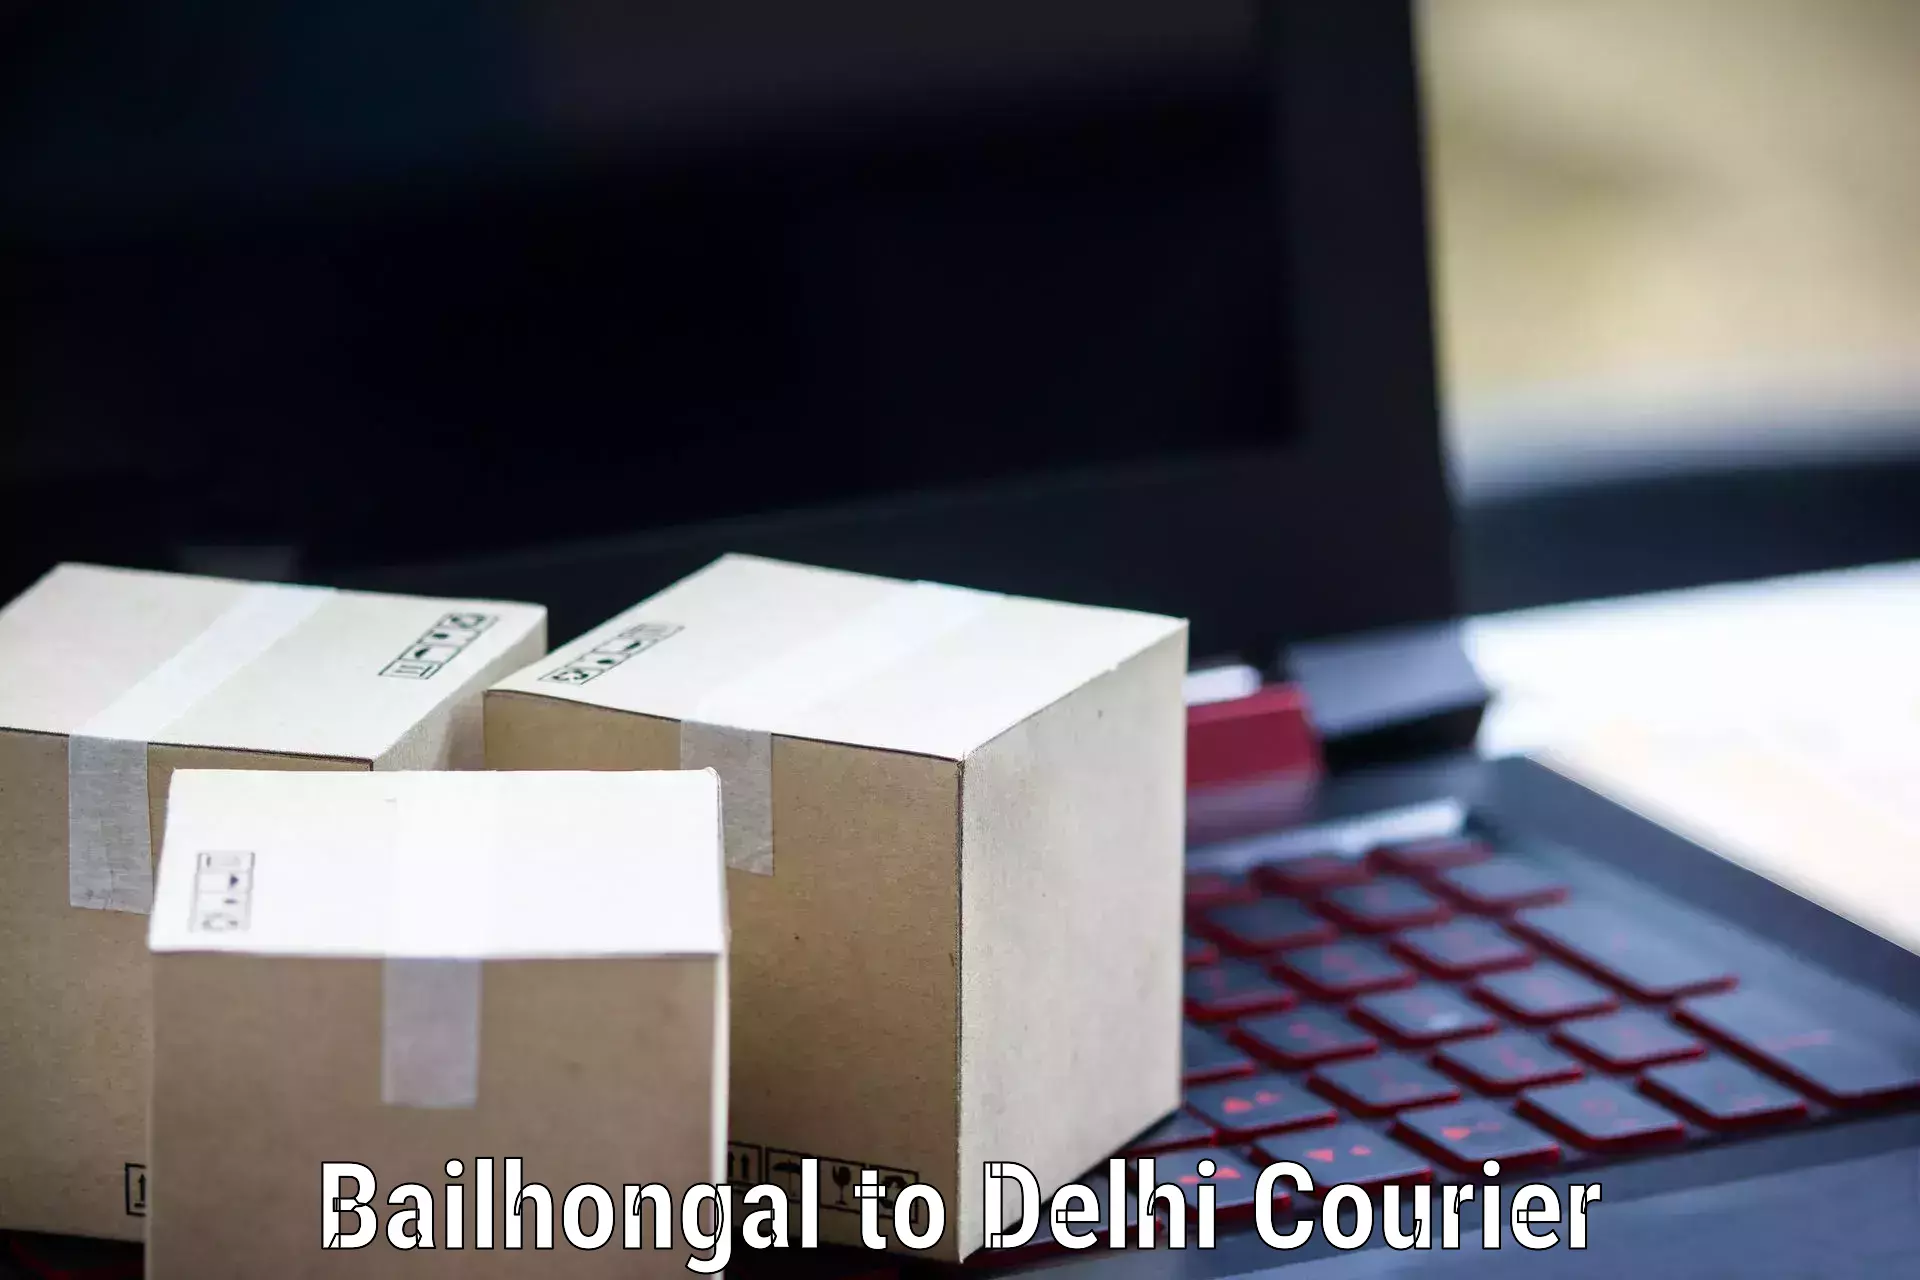 Cash on delivery service Bailhongal to Subhash Nagar